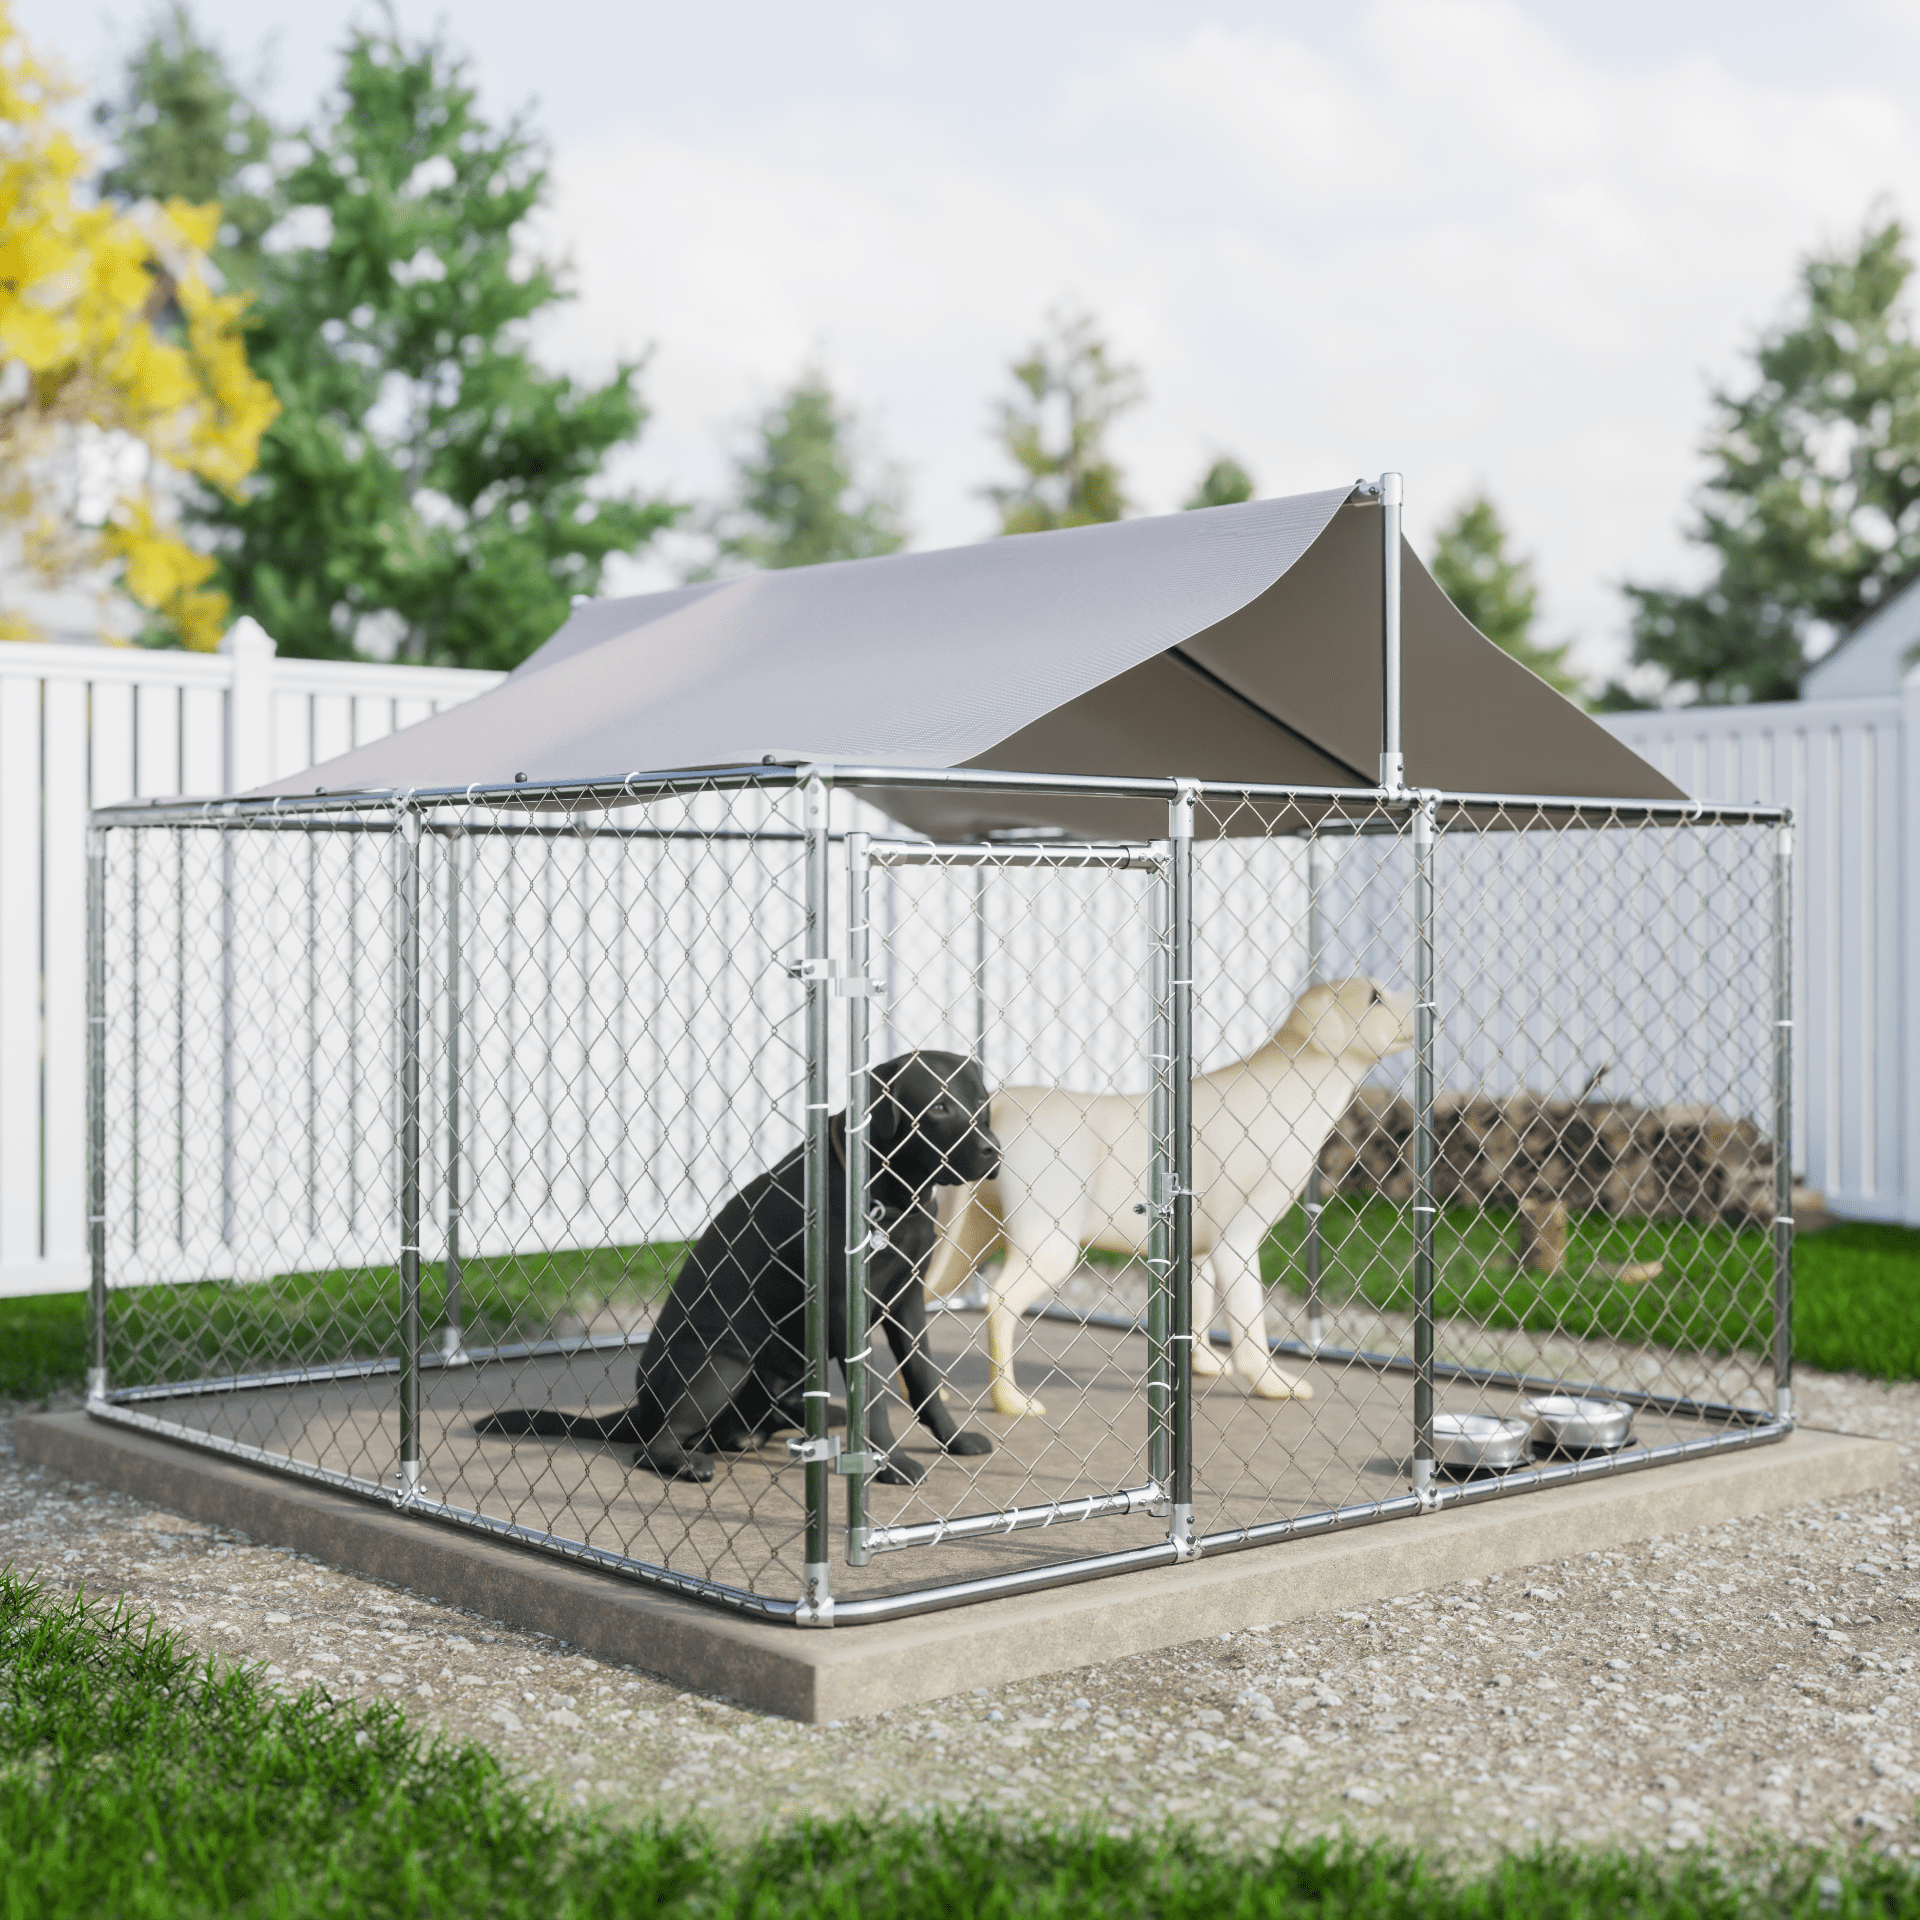 LZBEITEM 7.5 x 7.5ft Large Outdoor Dog Run Kennel， Heavy Duty Dog Cage Galvanized Steel Dog Fence Dog Enclosure Playpen with Waterproof Cover